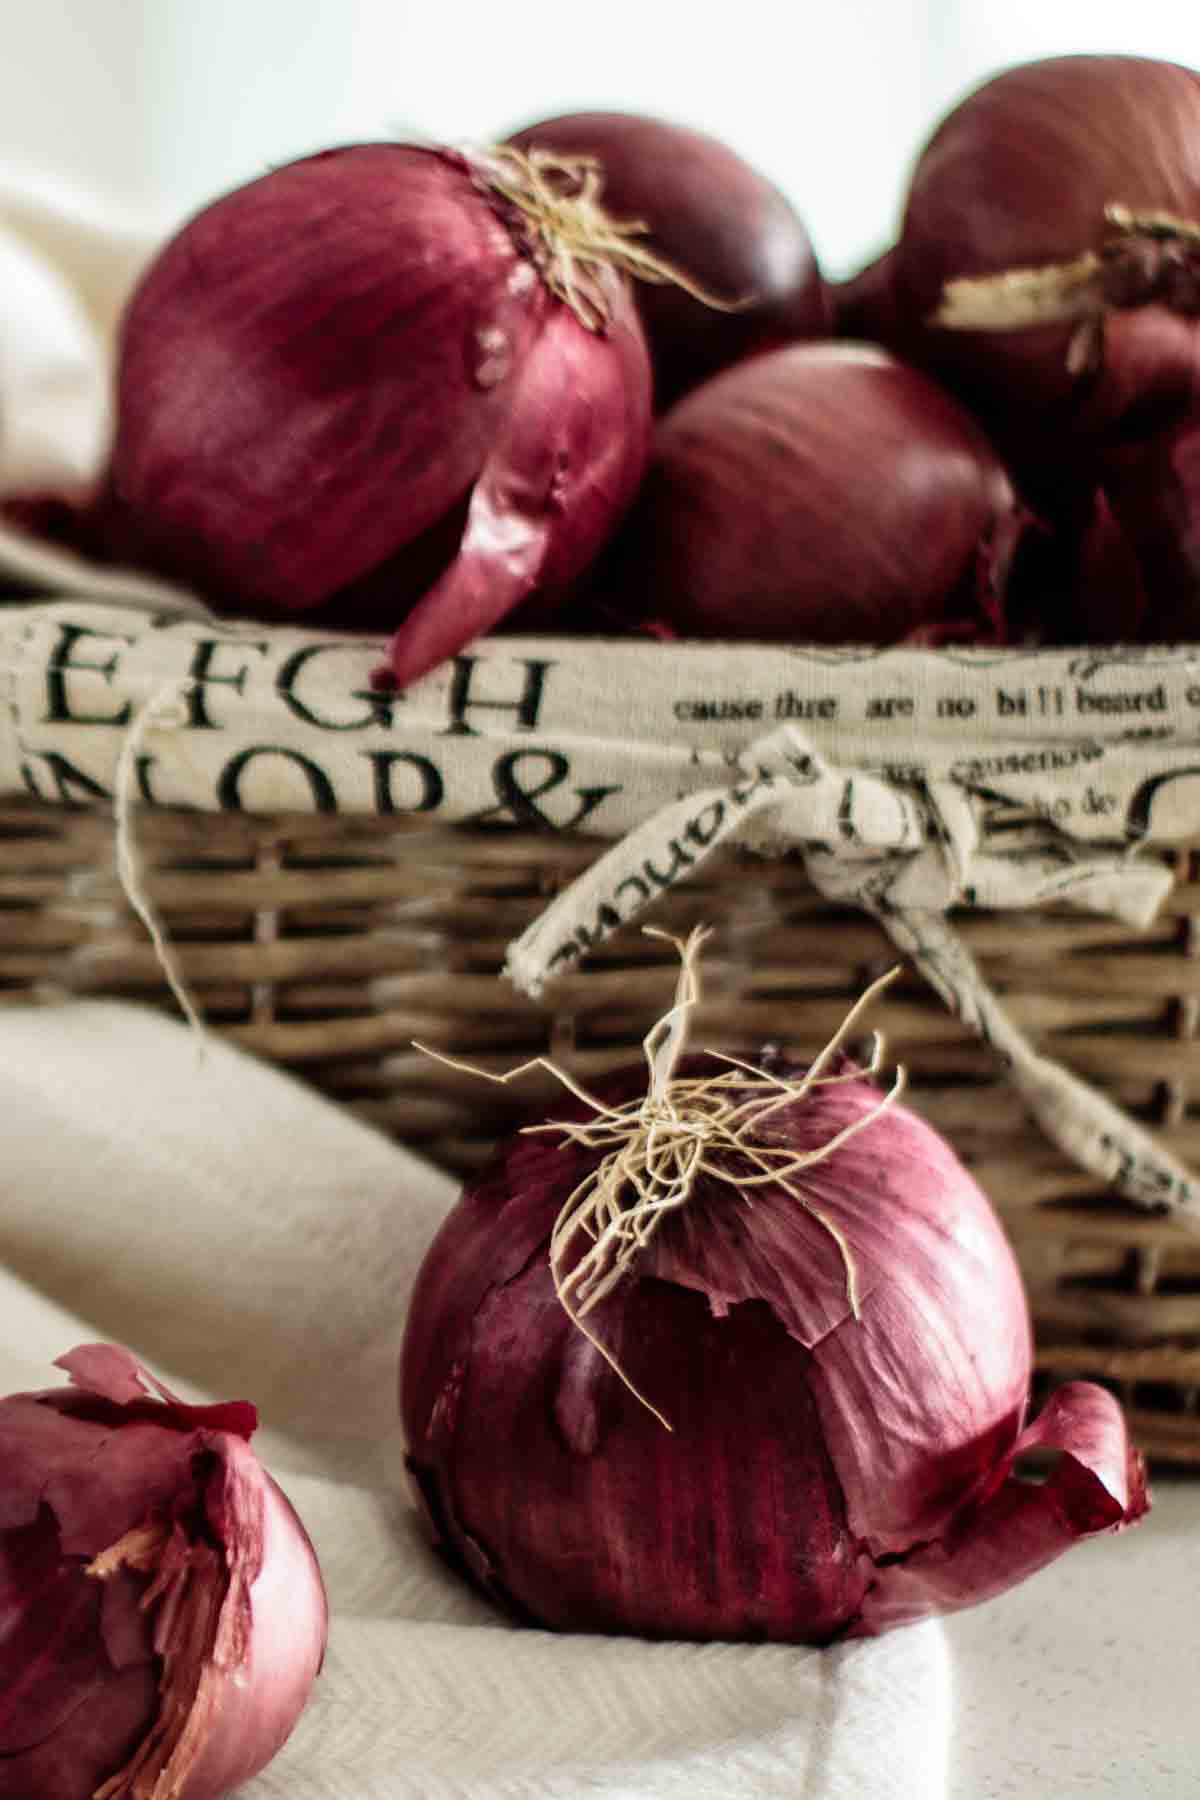 Red onions in a basket.